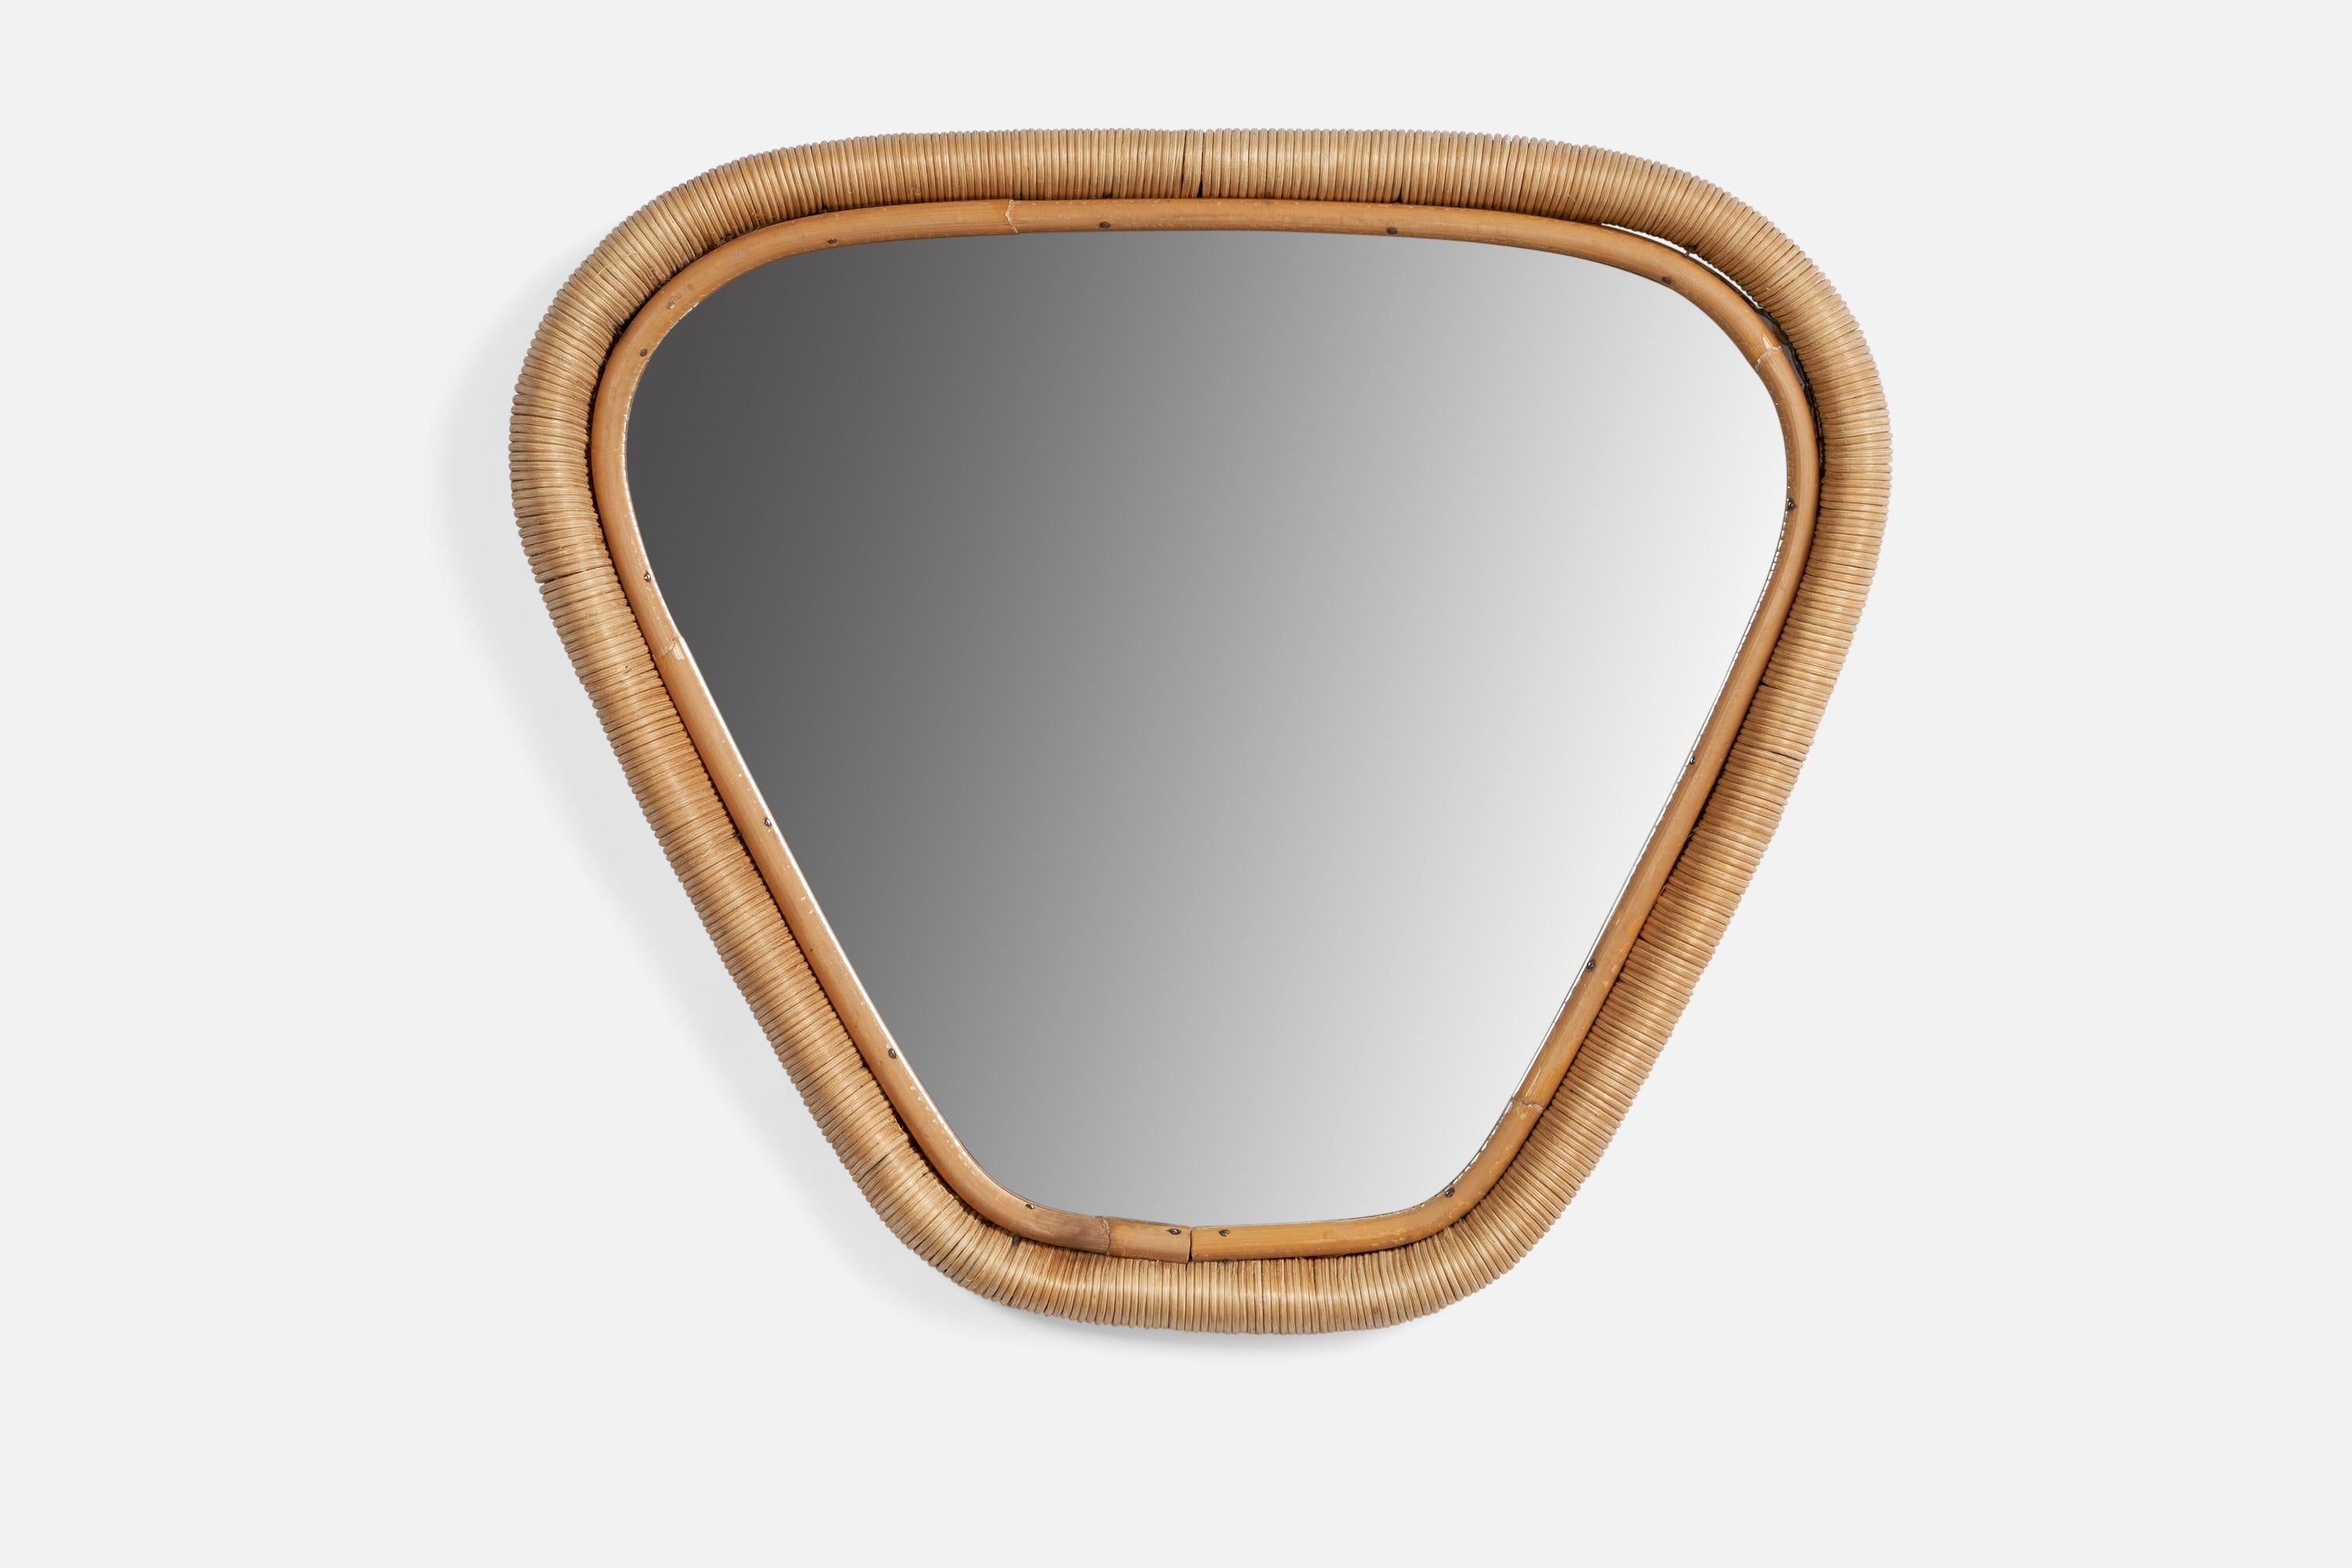 A moulded bamboo and pine mirror designed and produced in Italy, c. 1960s.